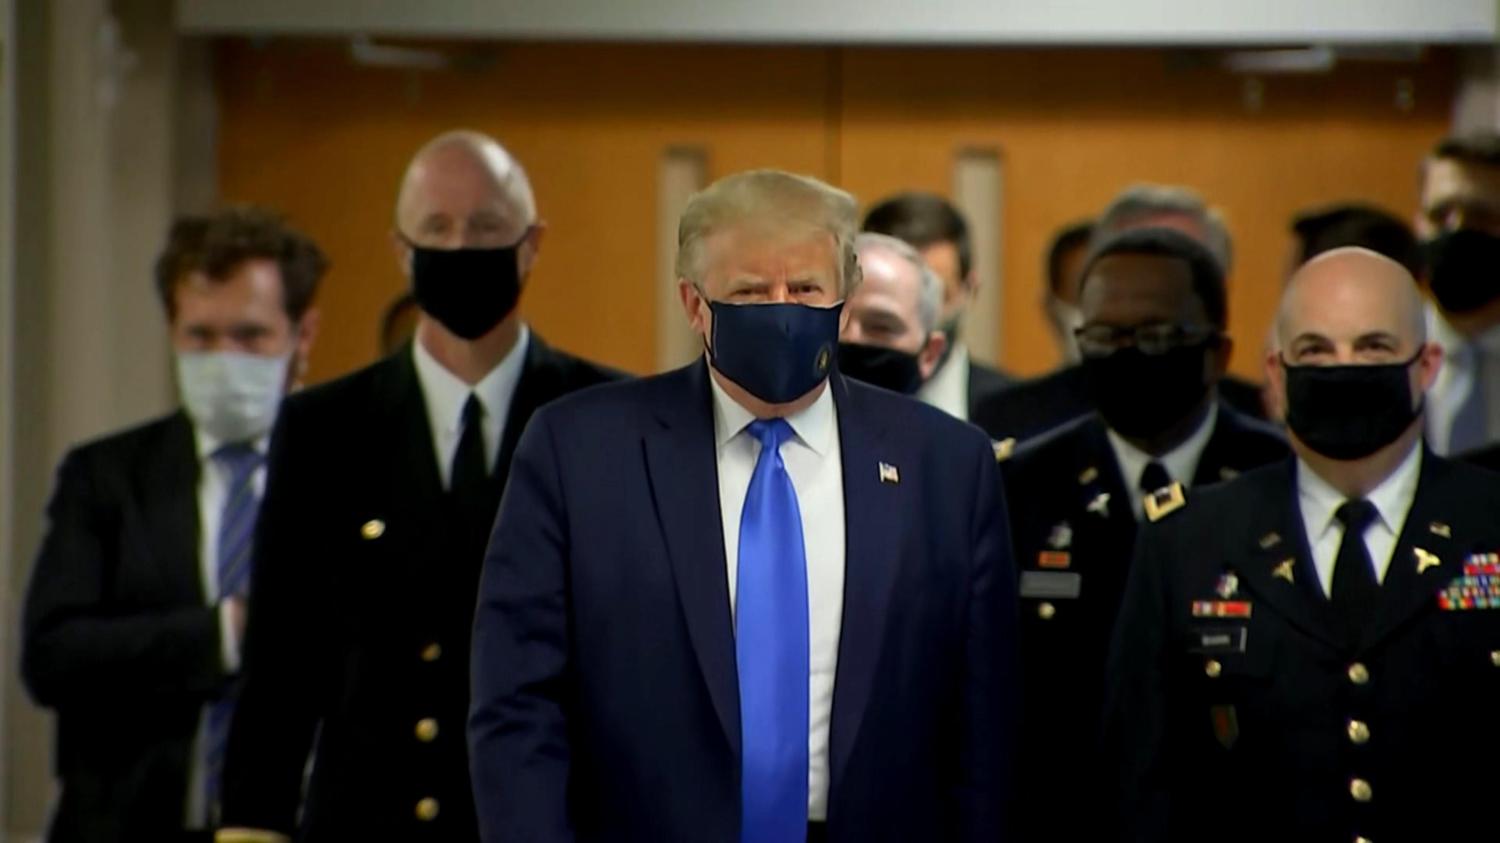 Bethesda, USA.- U.S. President Donald Trump wore a mask during a visit to a military hospital on Saturday (11), the first time the president has been seen in public with the type of facial covering recommended by health officials as a precaution against spreading or becoming infected by the novel coronavirus. Trump flew by helicopter to Walter Reed National Military Medical Center in Bethesda, Md., located just outside of Washington, D.C., to meet wounded servicemembers and health care providers caring for COVID-19 patients. As he left the White House, he told reporters: "When you're in a hospital, especially ... I think it's expected to wear a mask."